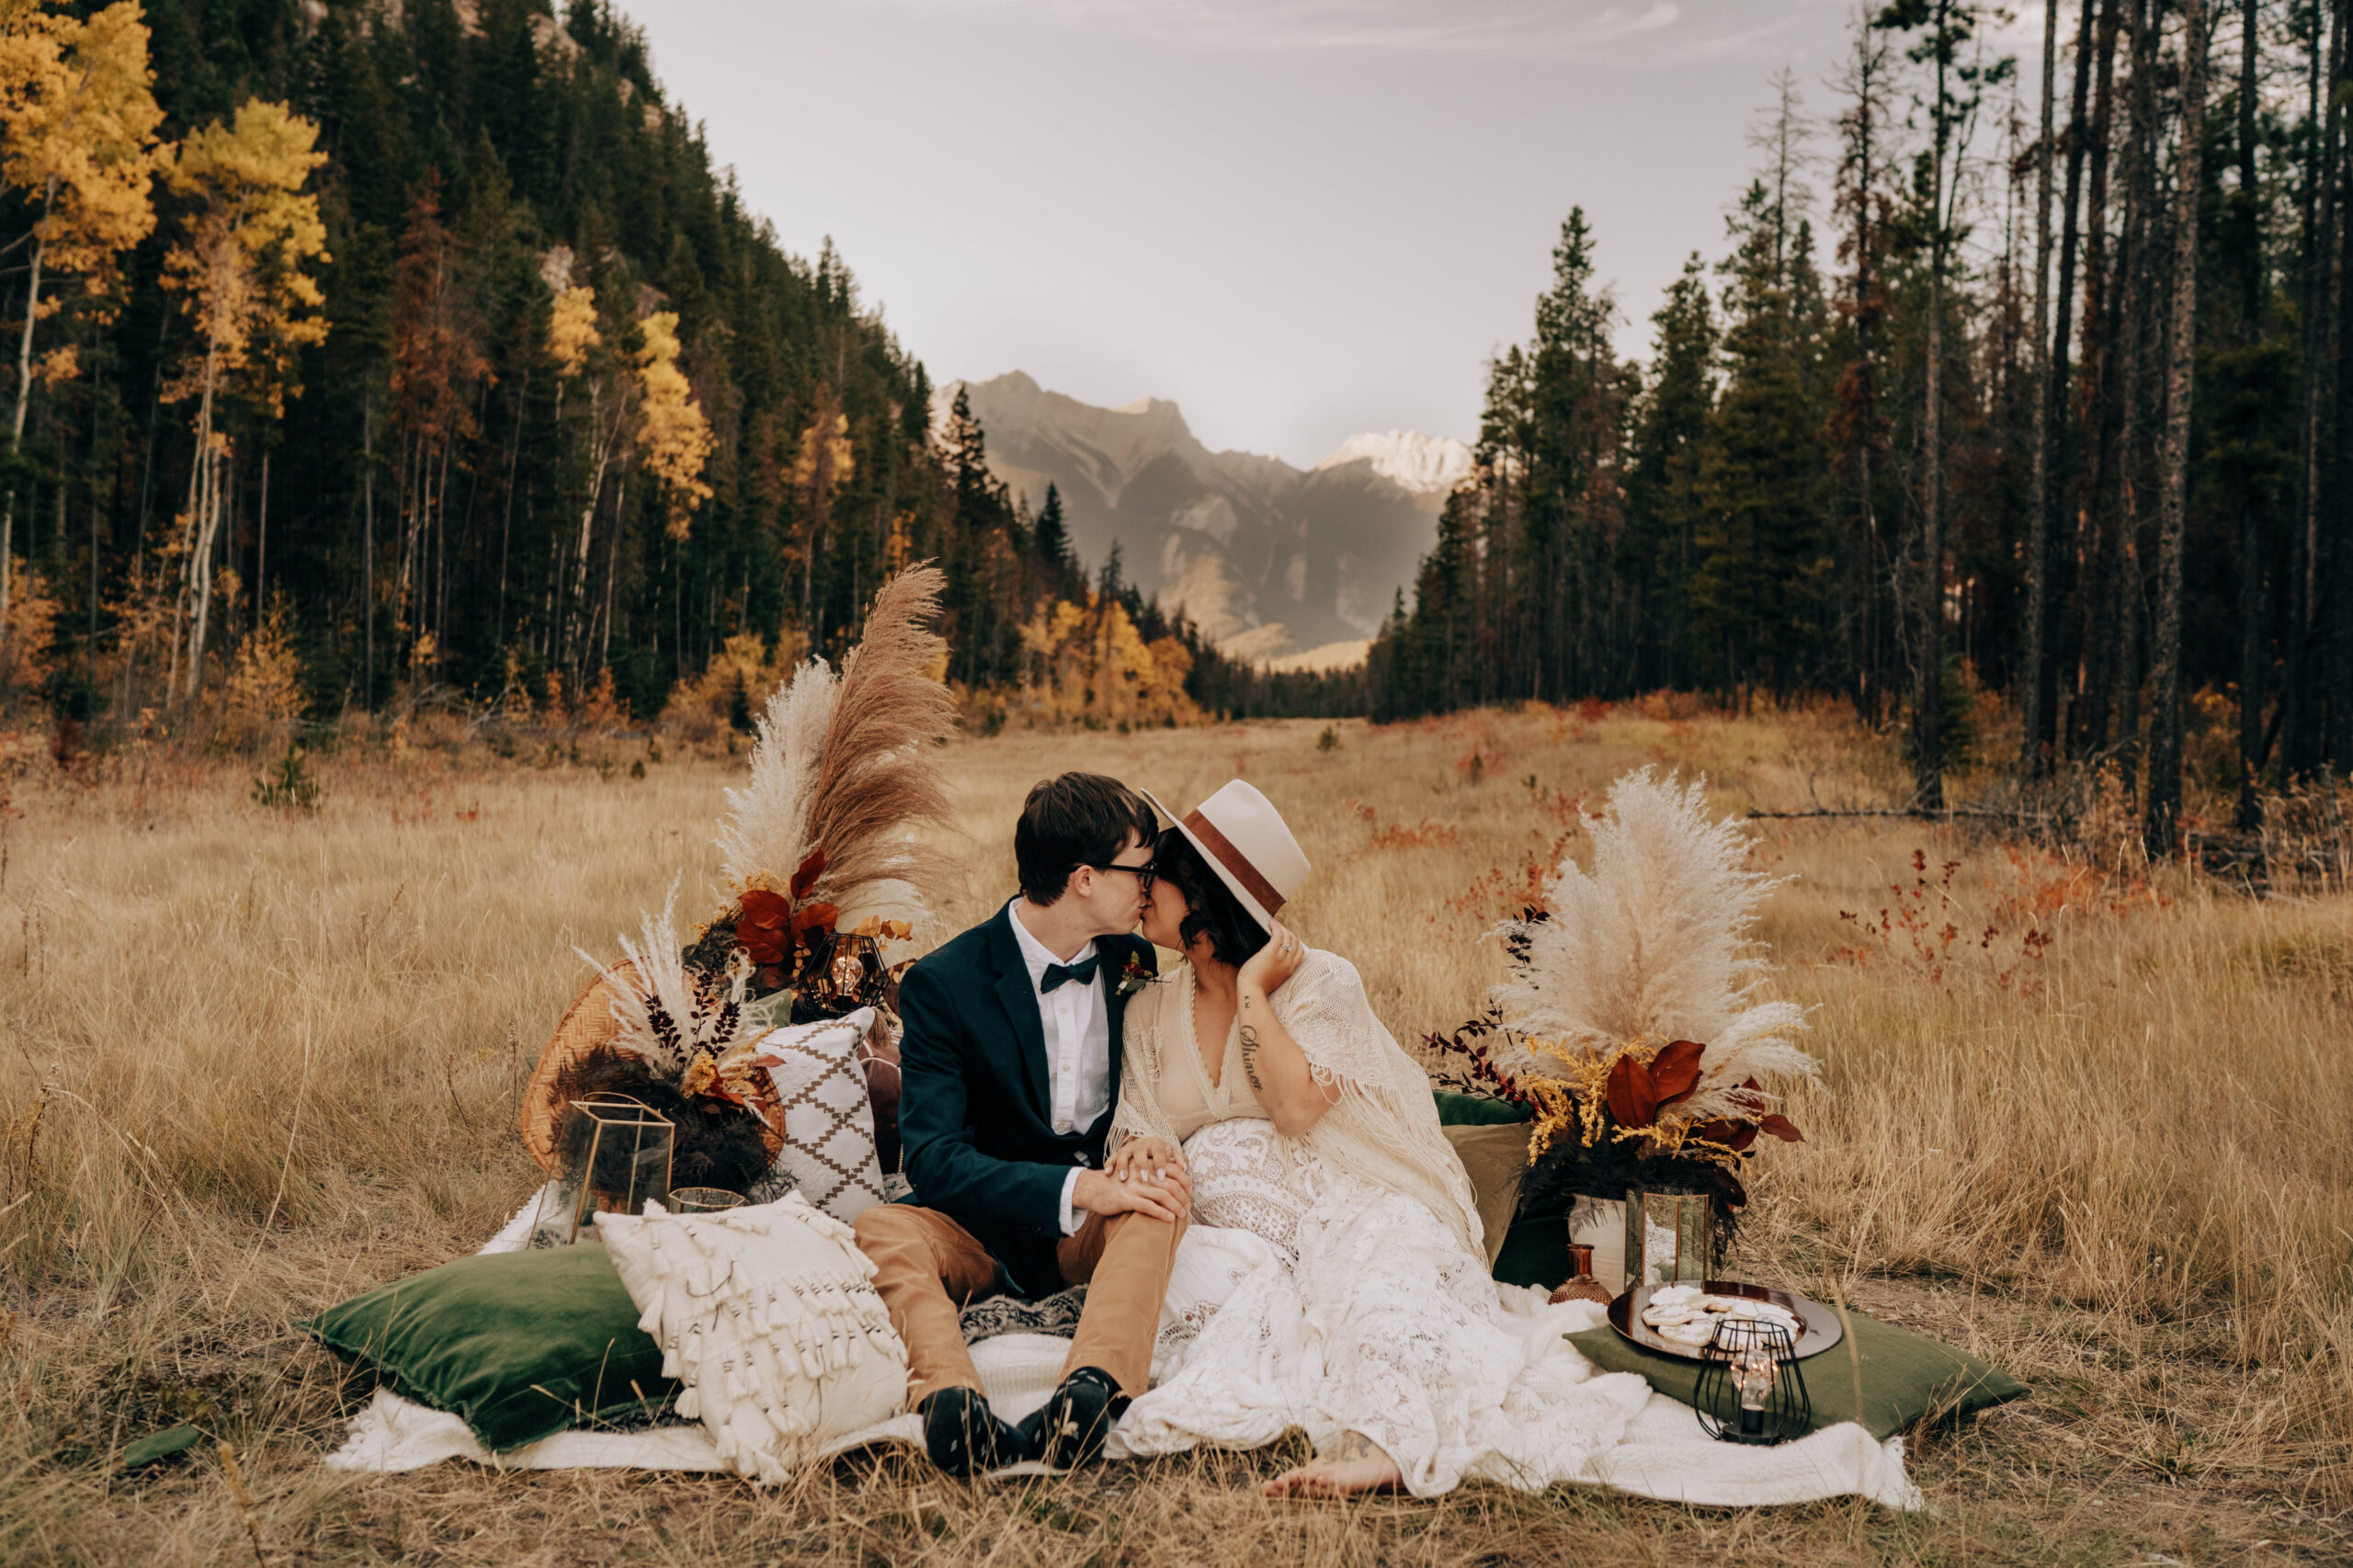 Boho couple with boho wedding decor in valley in forest